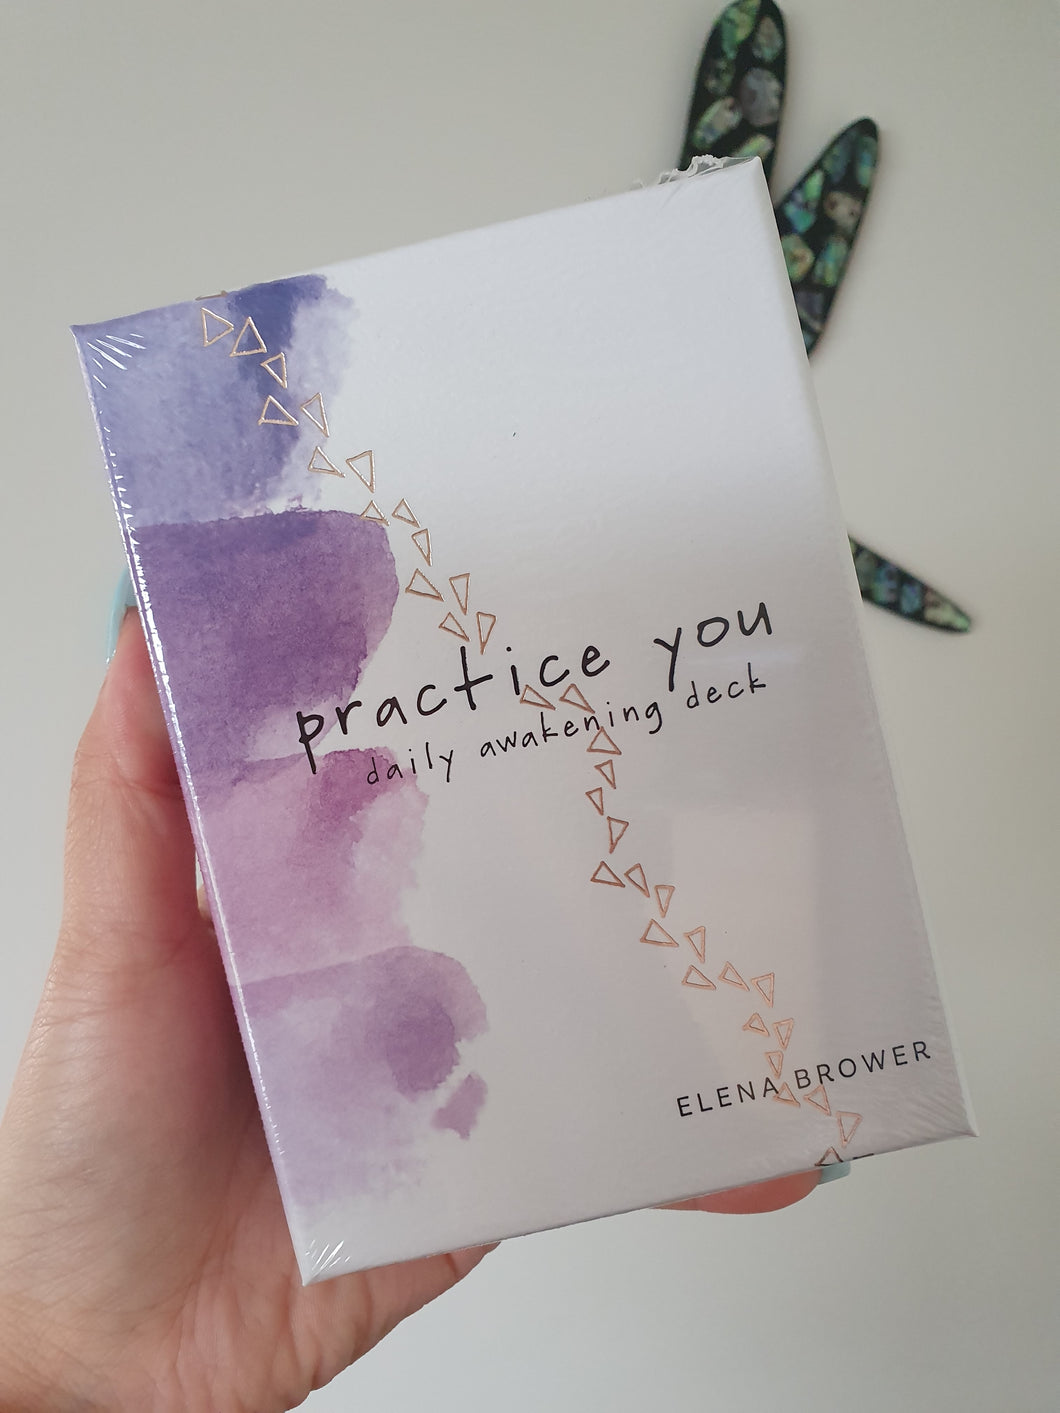 Practice You Daily Awakening Deck by Elena Brower